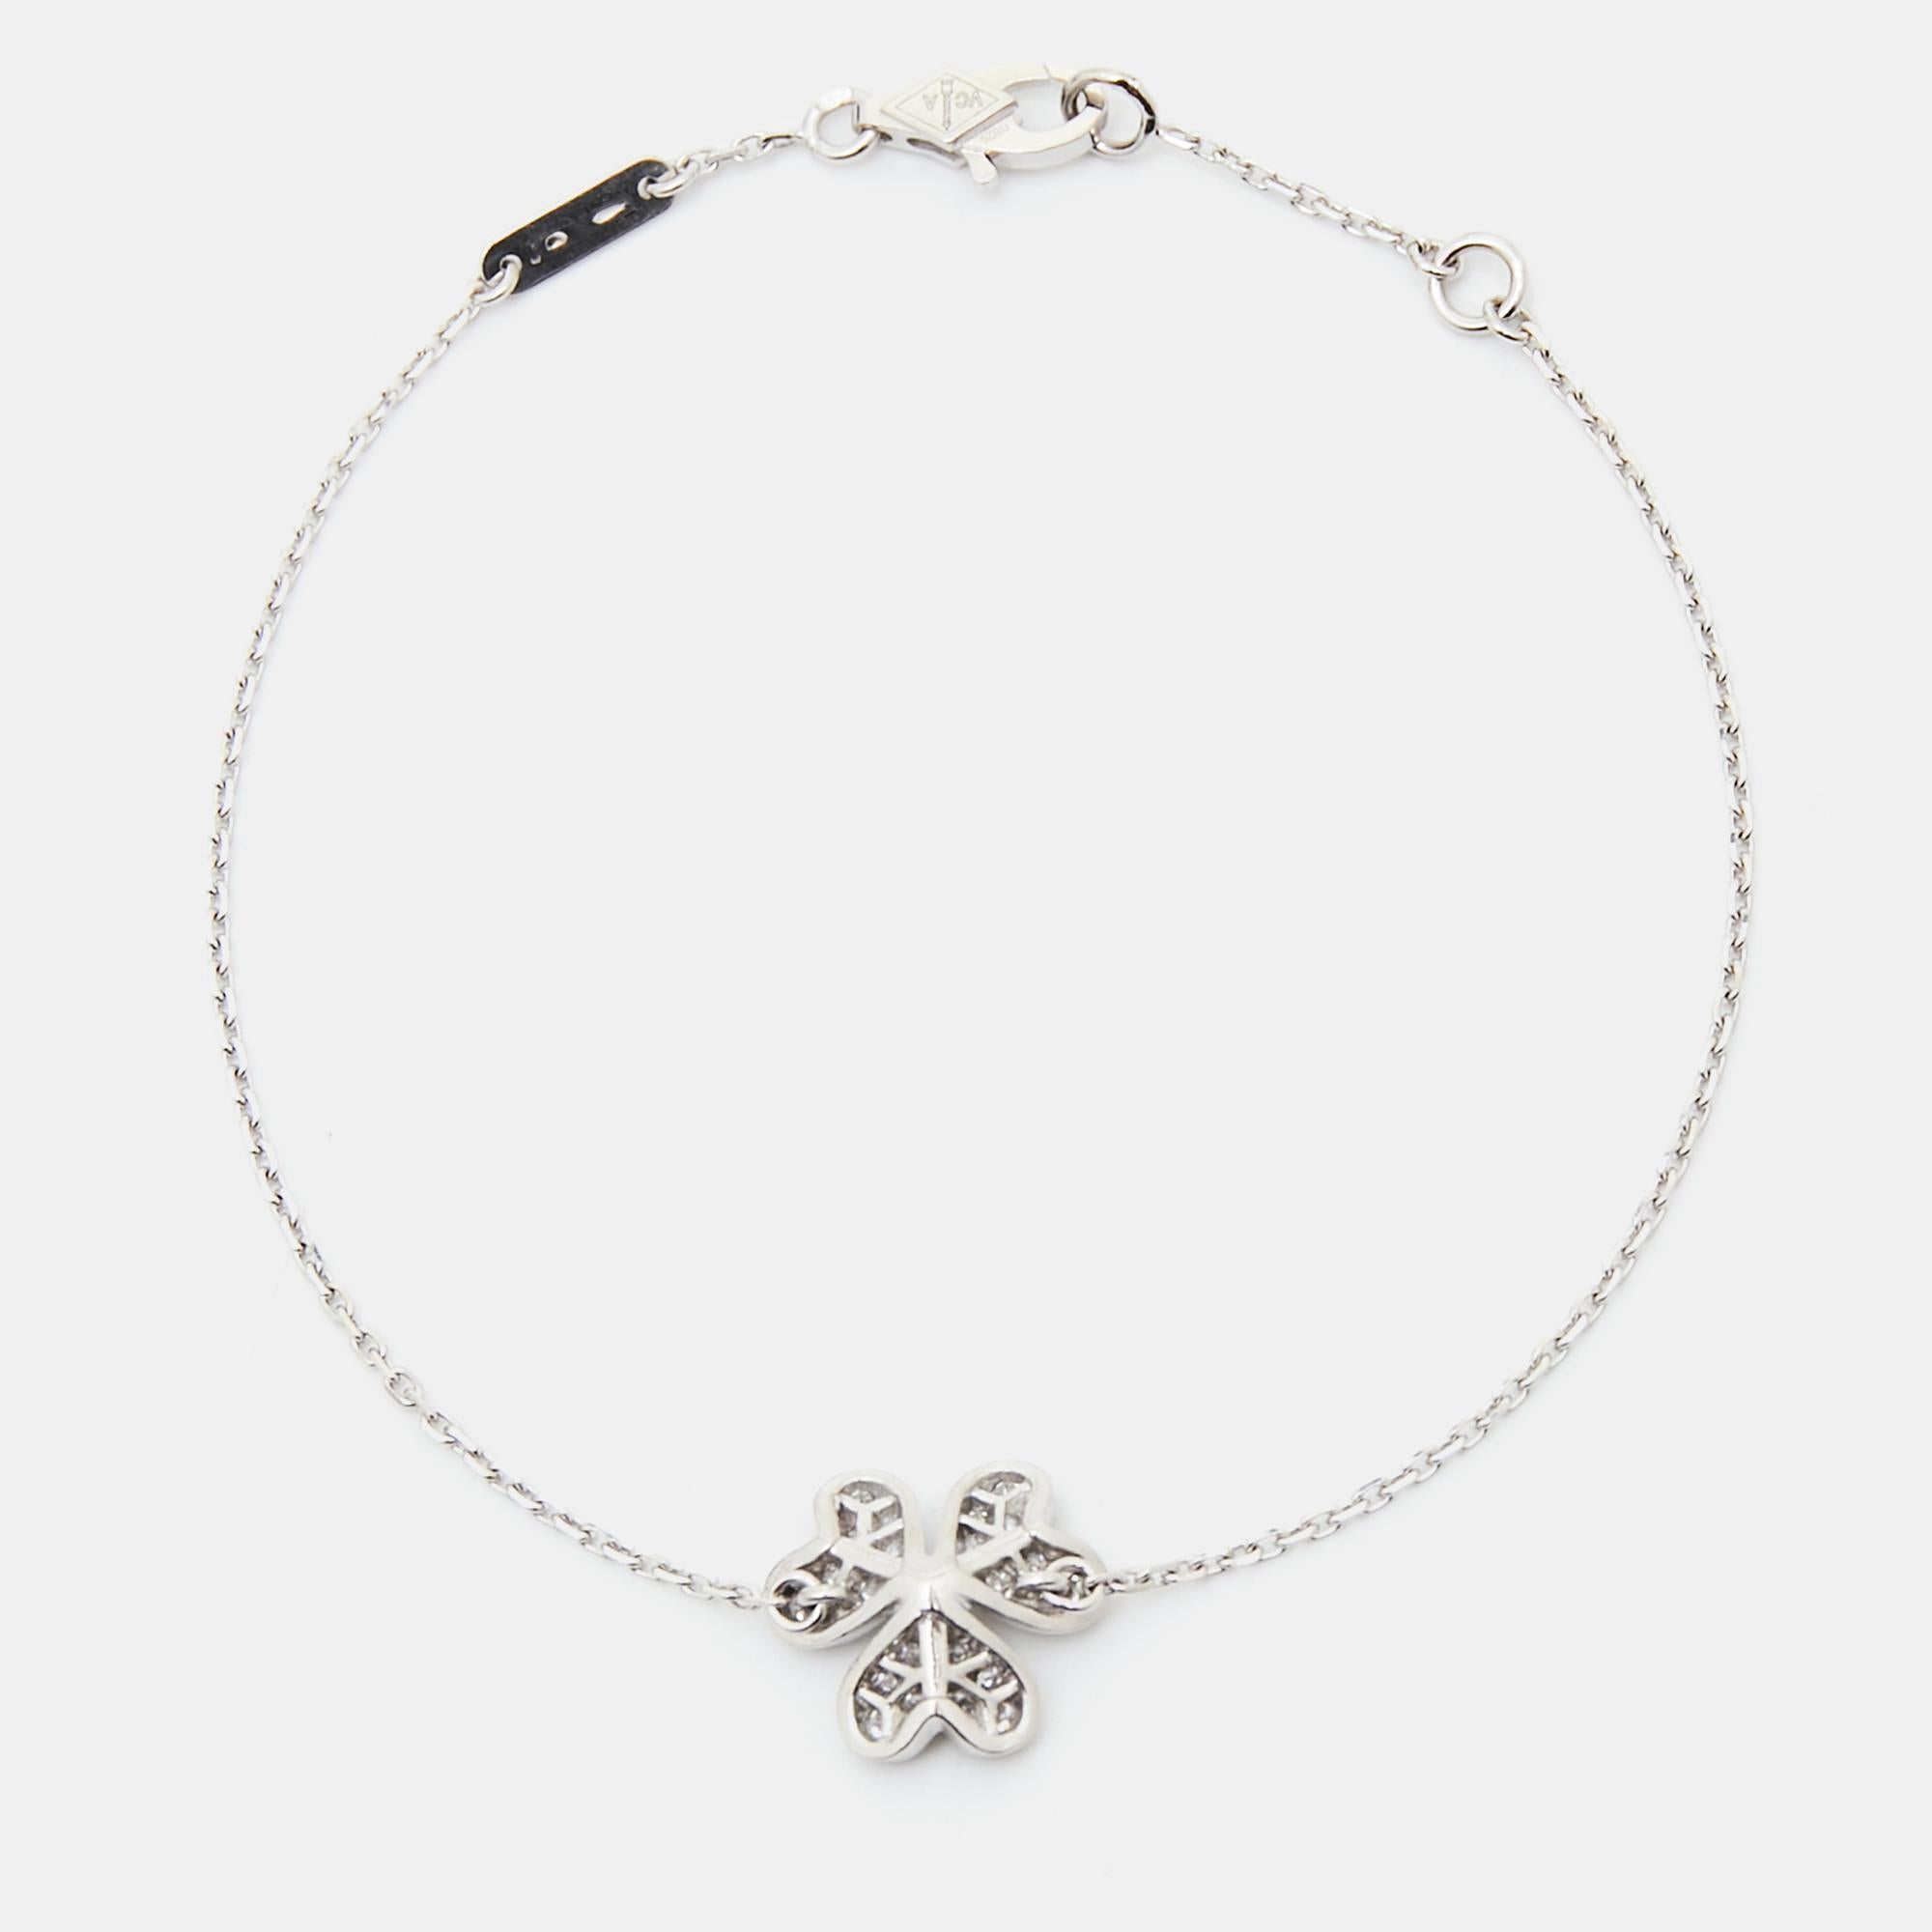 Ideal for everyday use, this beautiful bracelet from Van Cleef & Arpels belongs to their Frivole collection, which is all about demure floral motifs designed with airy aesthetics. An ideal companion to your feminine spirit, the bracelet features an